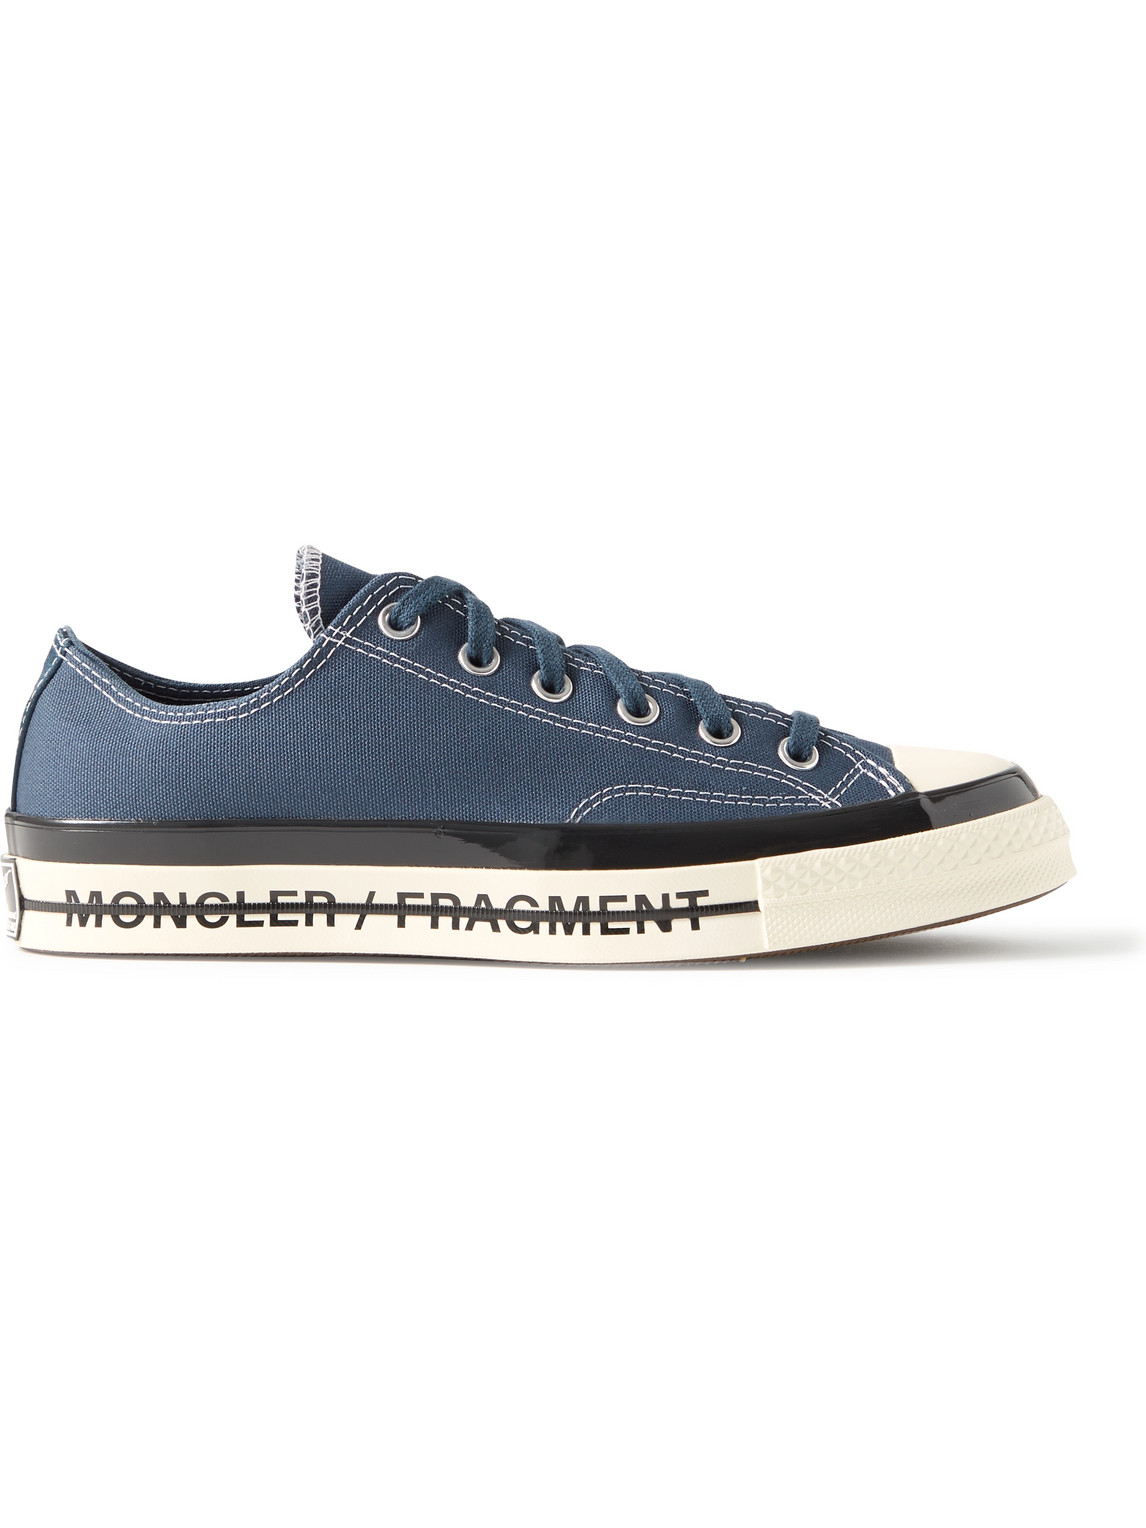 Converse 7 Moncler Fragment Fraylor III Canvas Sneakers